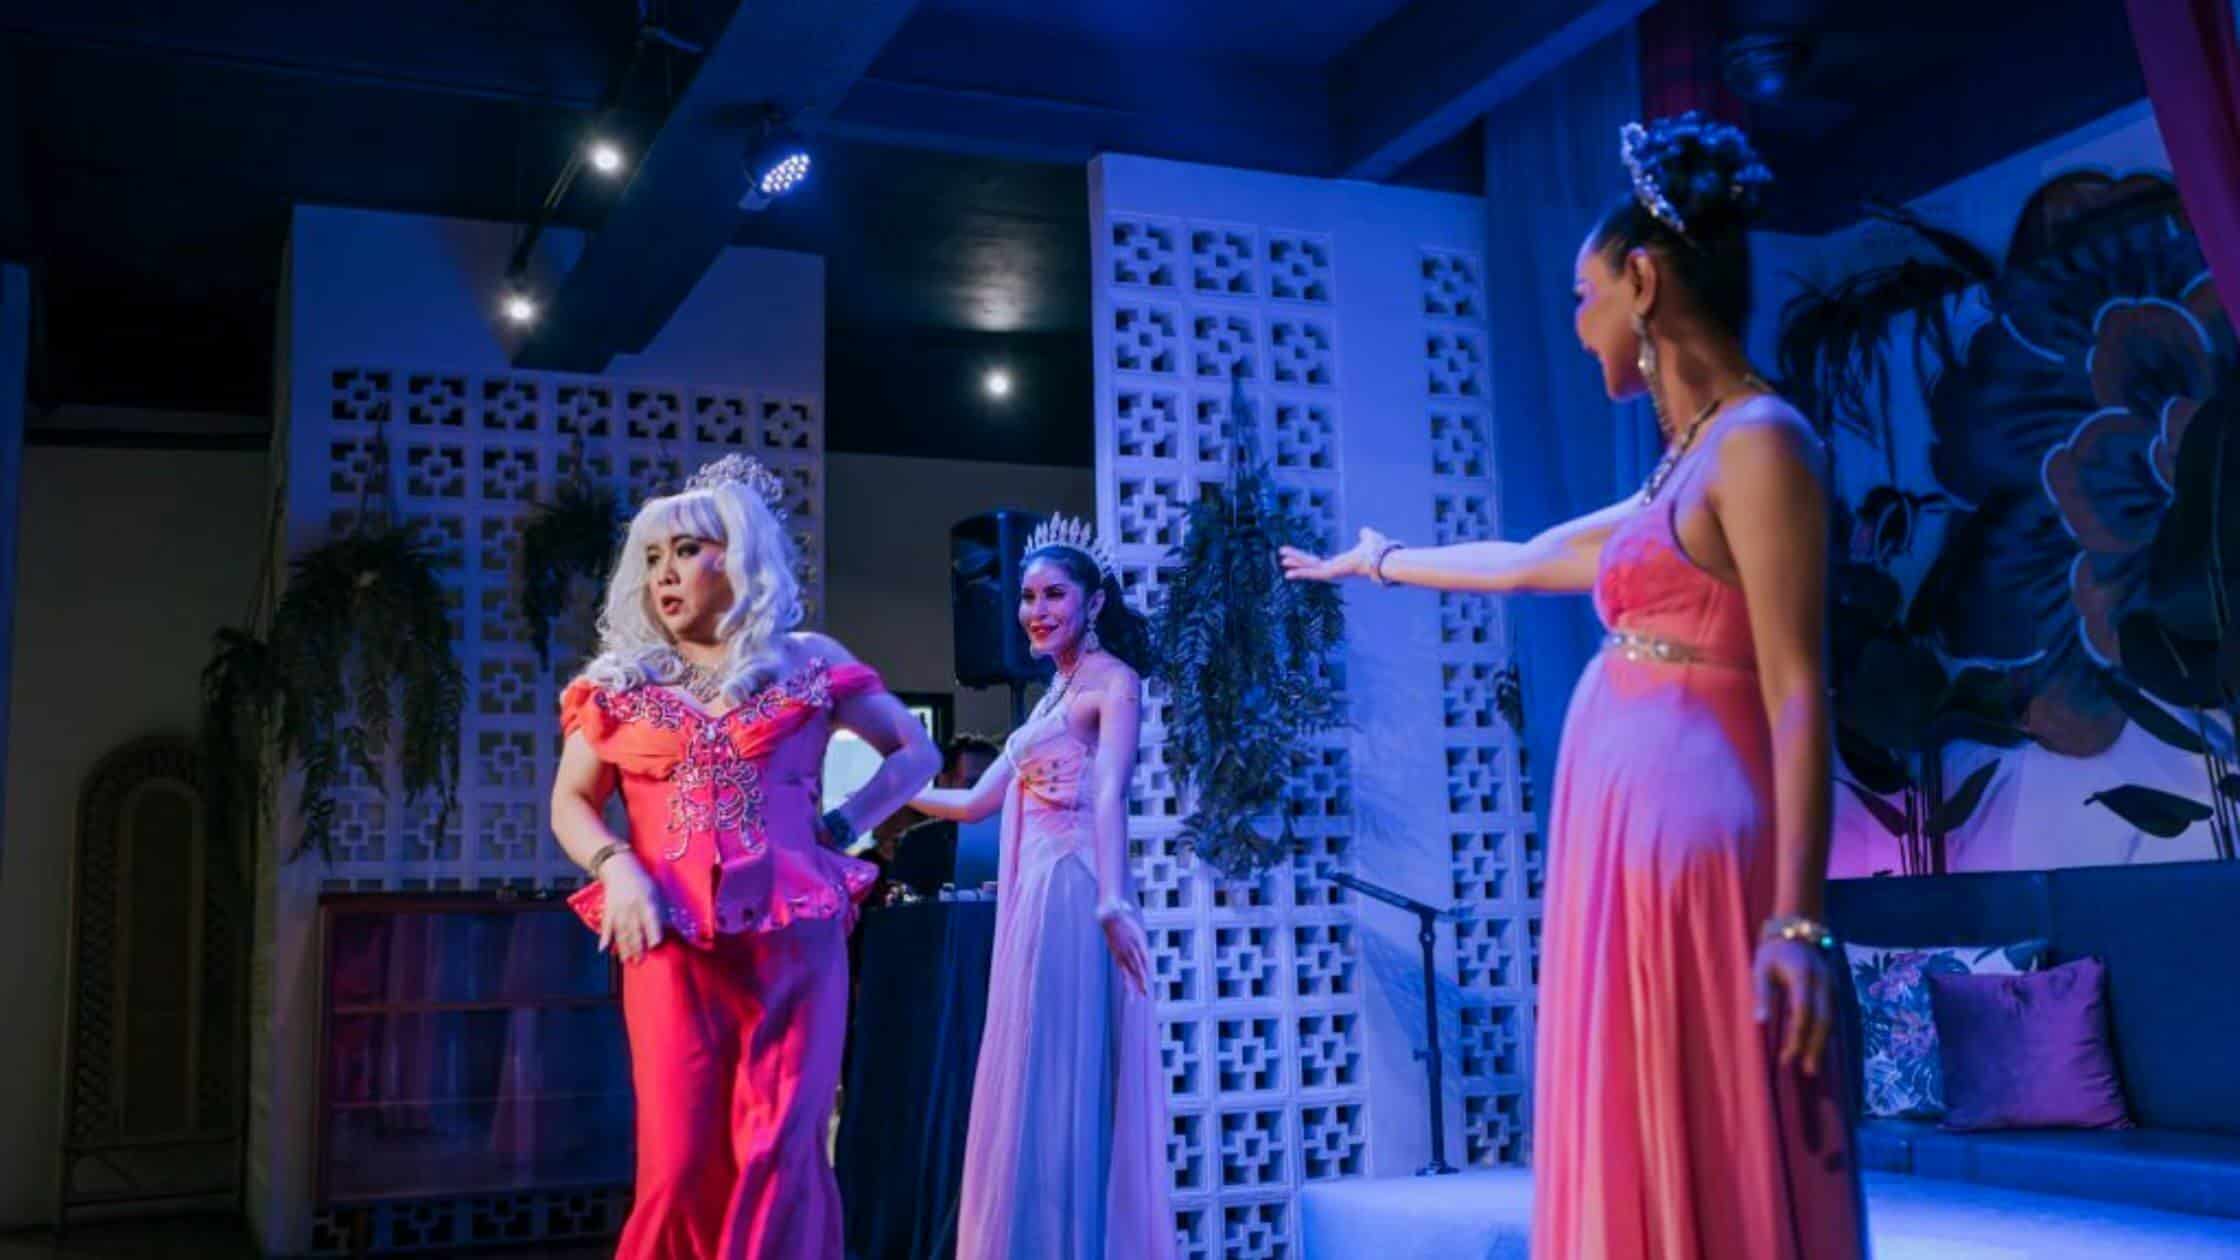 Narcan Queen San Francisco Performer Uses Drag Performance To Save Lives